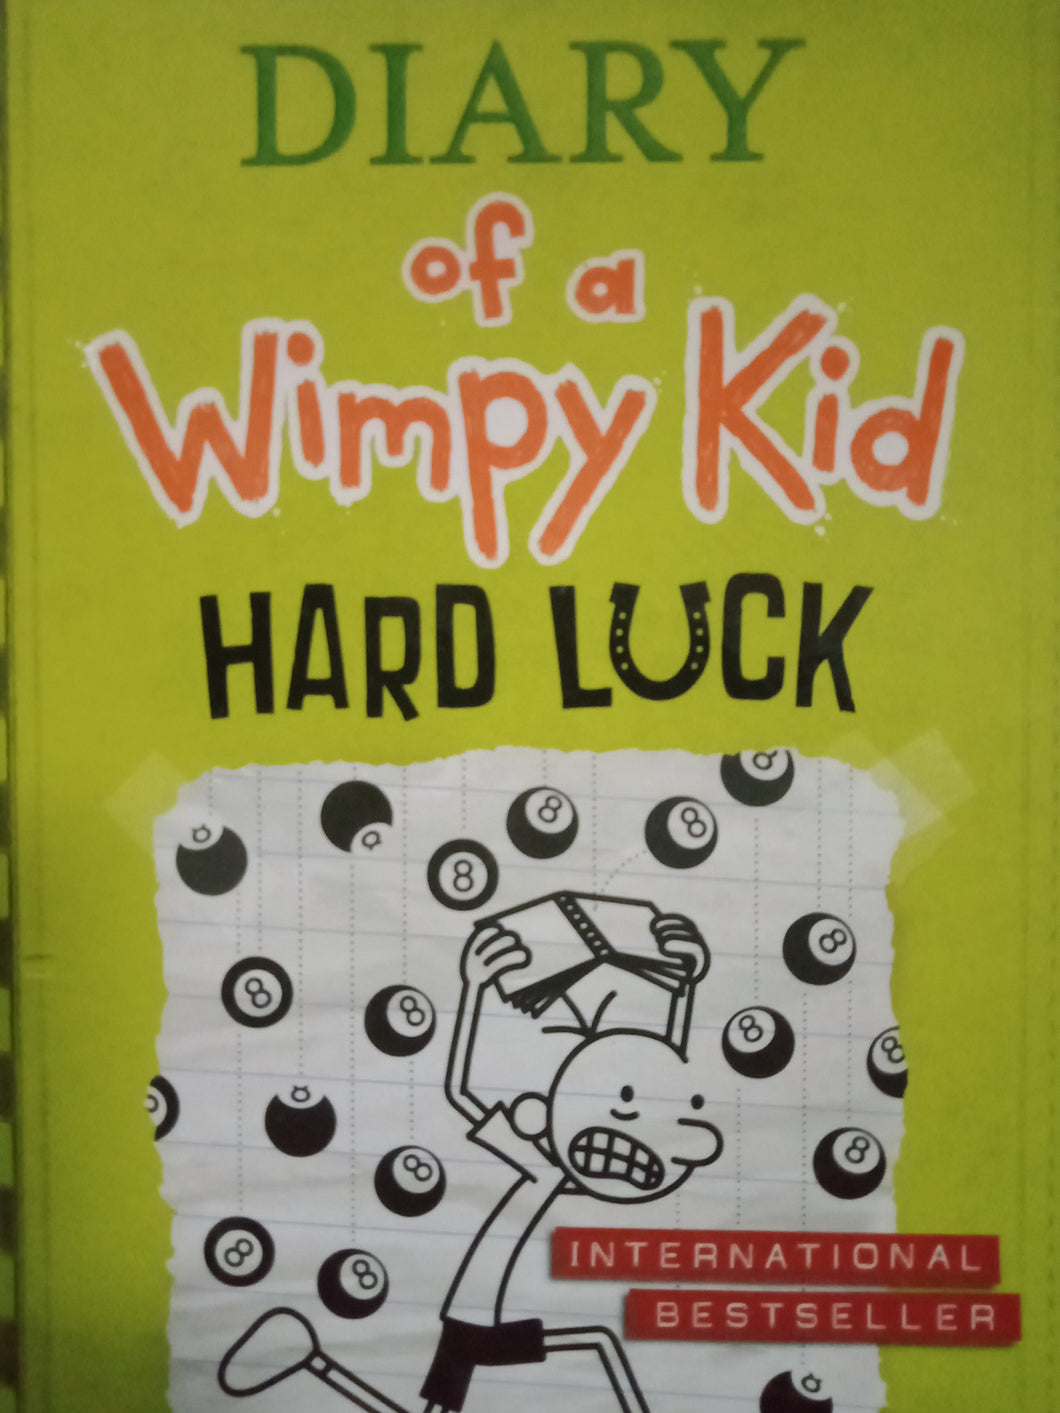 Diary Of A Wimpy Kid Hard Luck by Jeff Kinney